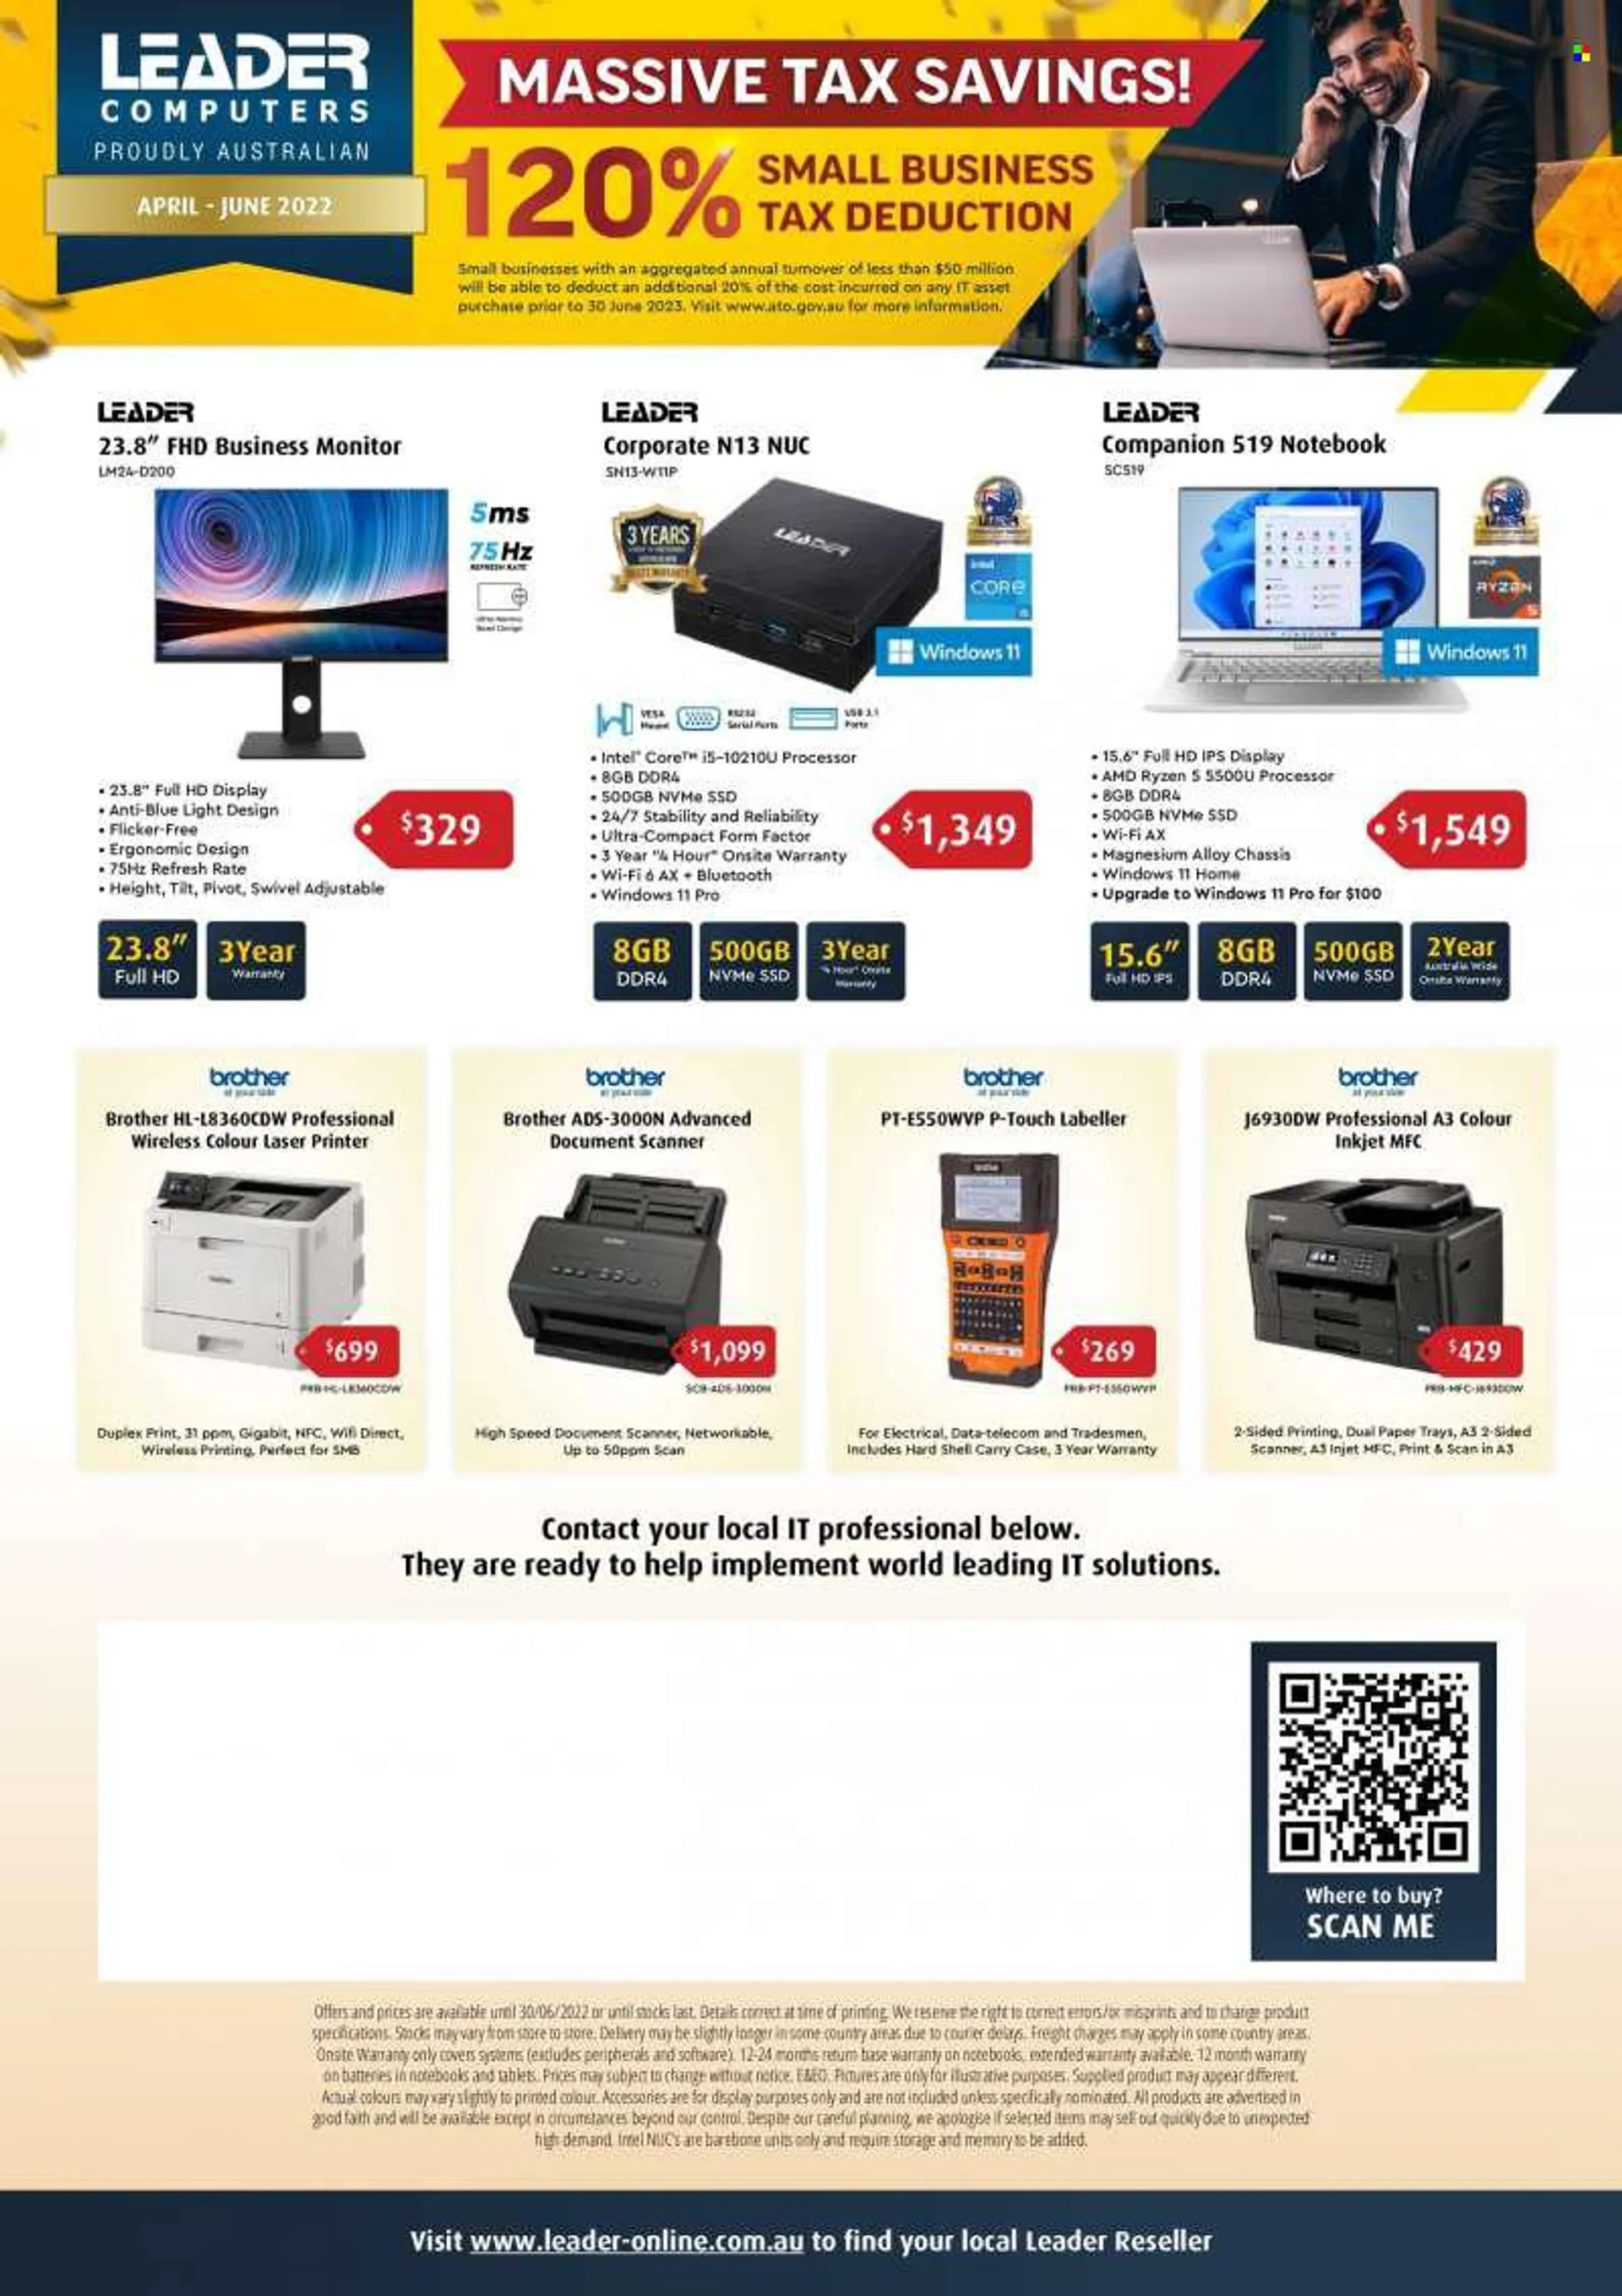 Leader Computers Catalogue - 1 Apr 2022 - 30 Jun 2022. - Catalogue valid from 1 April to 30 June 2022 - page 20